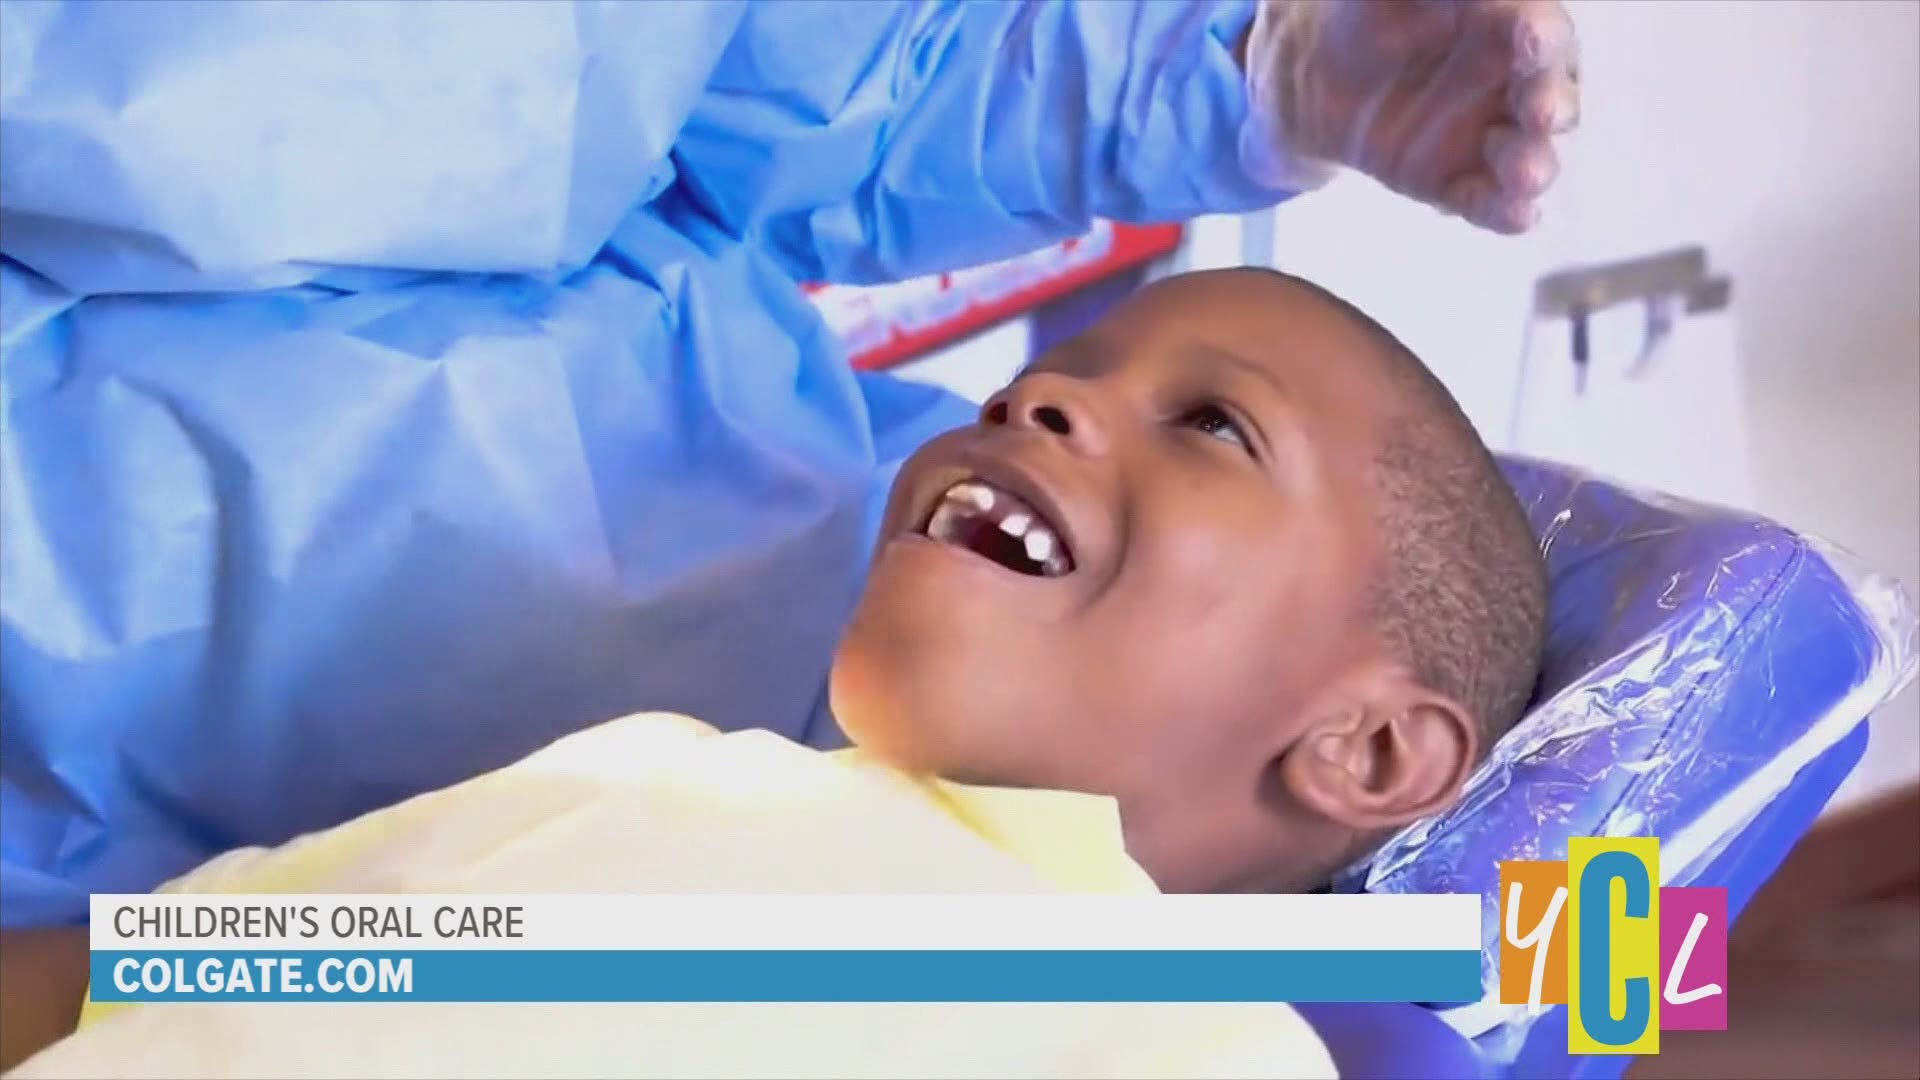 'Bright Smiles Bright Futures' and the mission to create a zero cavity future for kids.
This segment was paid for by Colgate Palmolive.